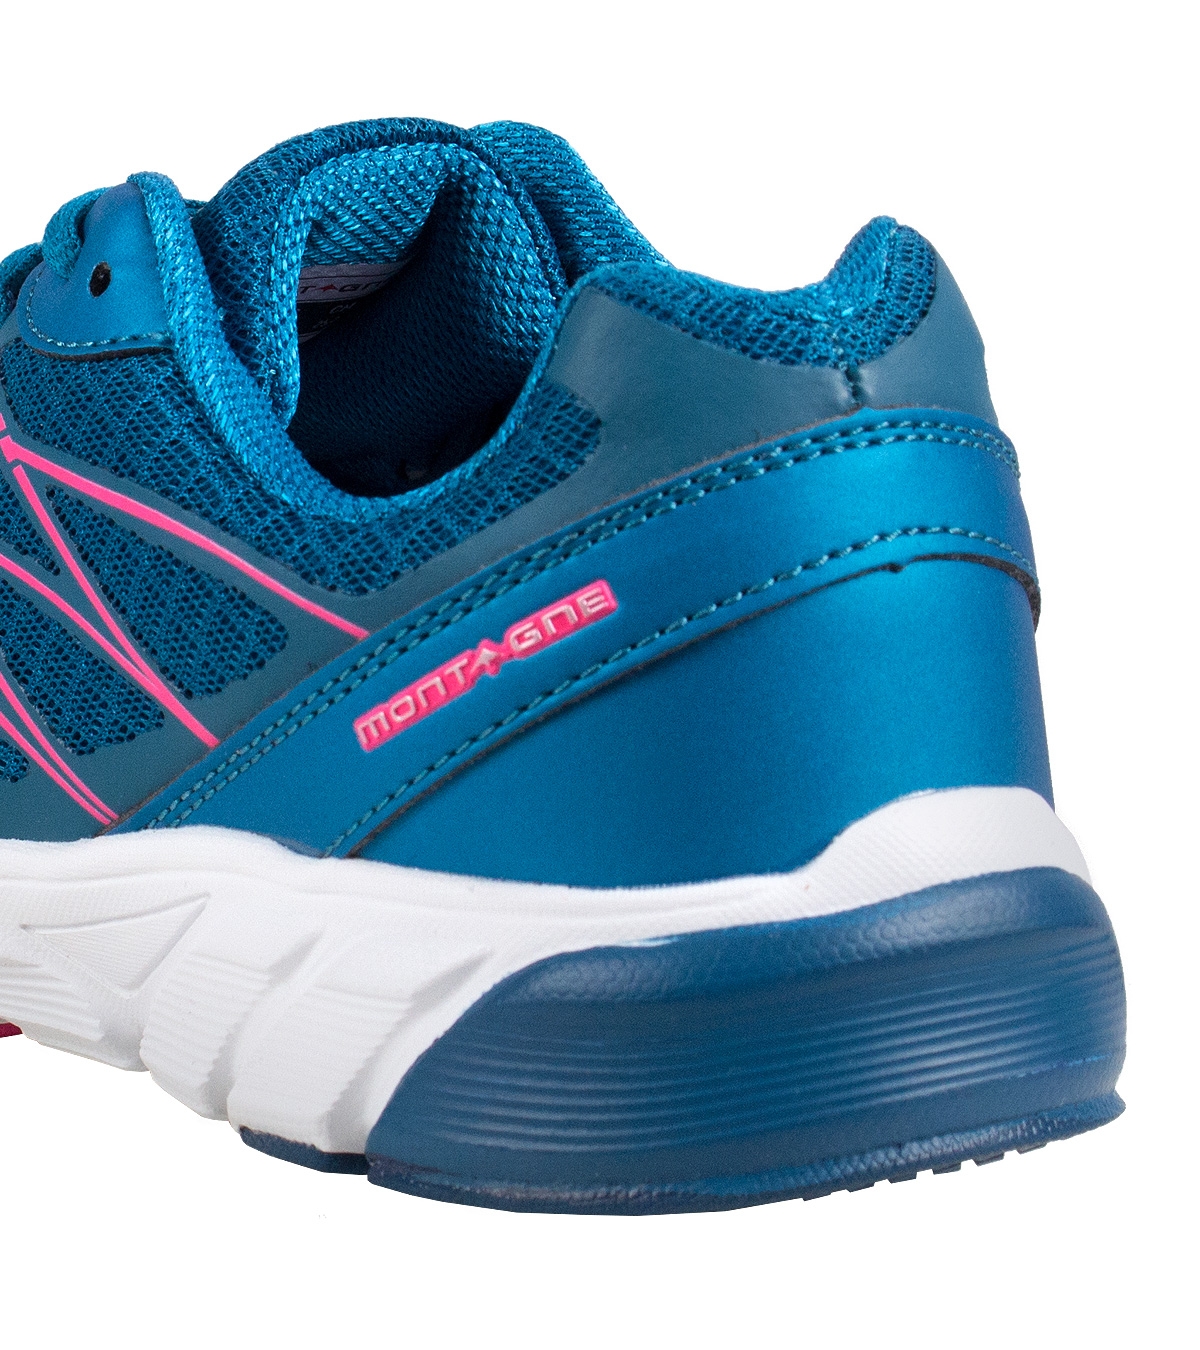 Shop Zapatillas Montagne Mujer Running UP 55% OFF